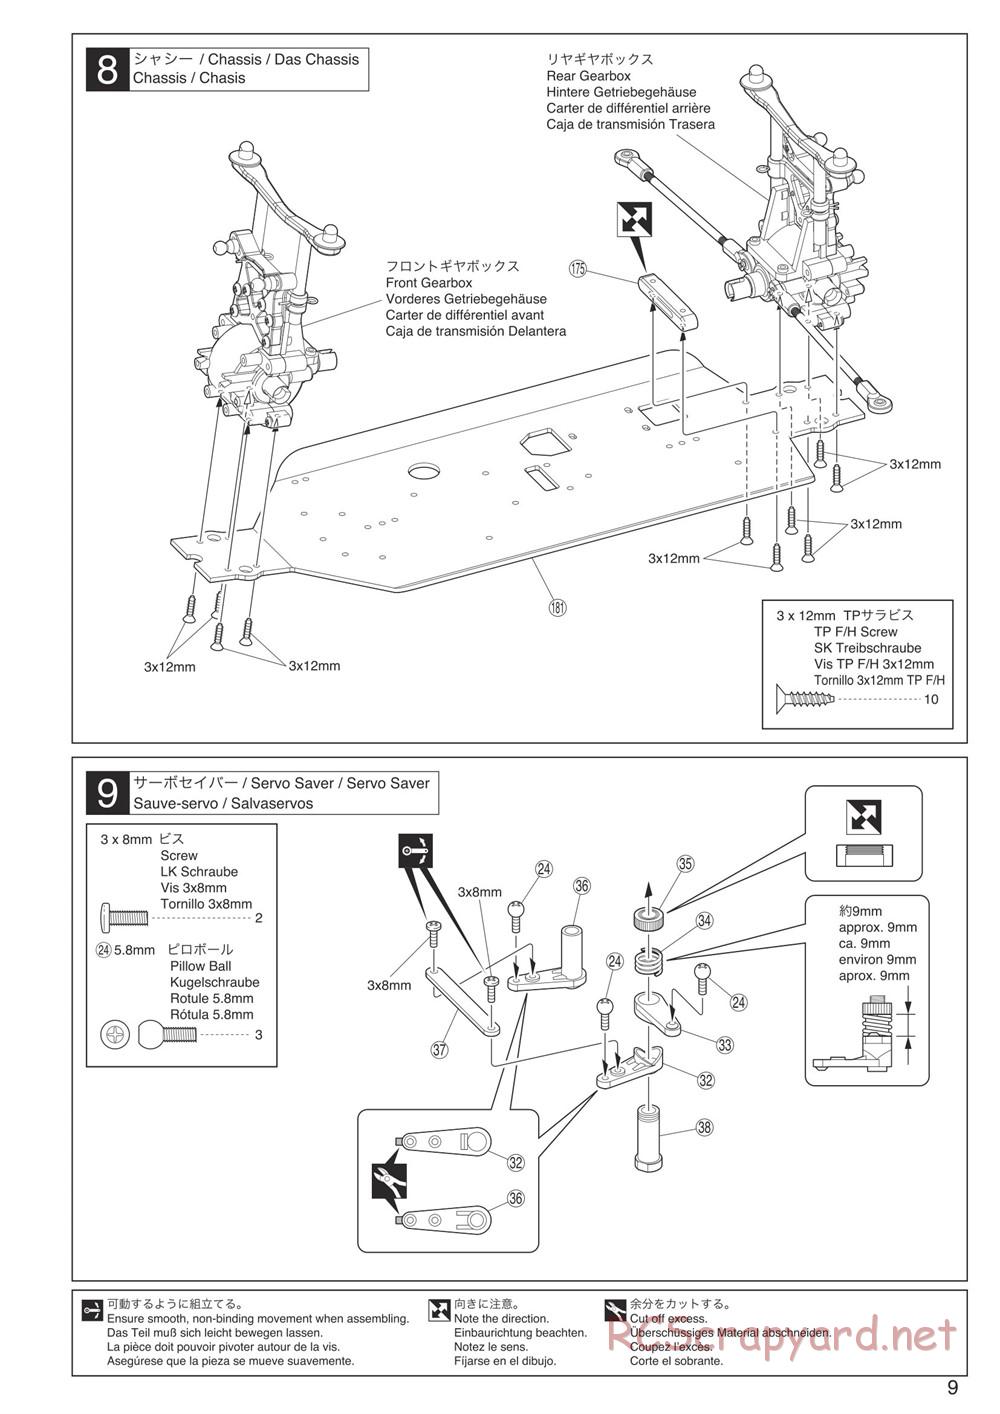 Kyosho - DMT - Manual - Page 9